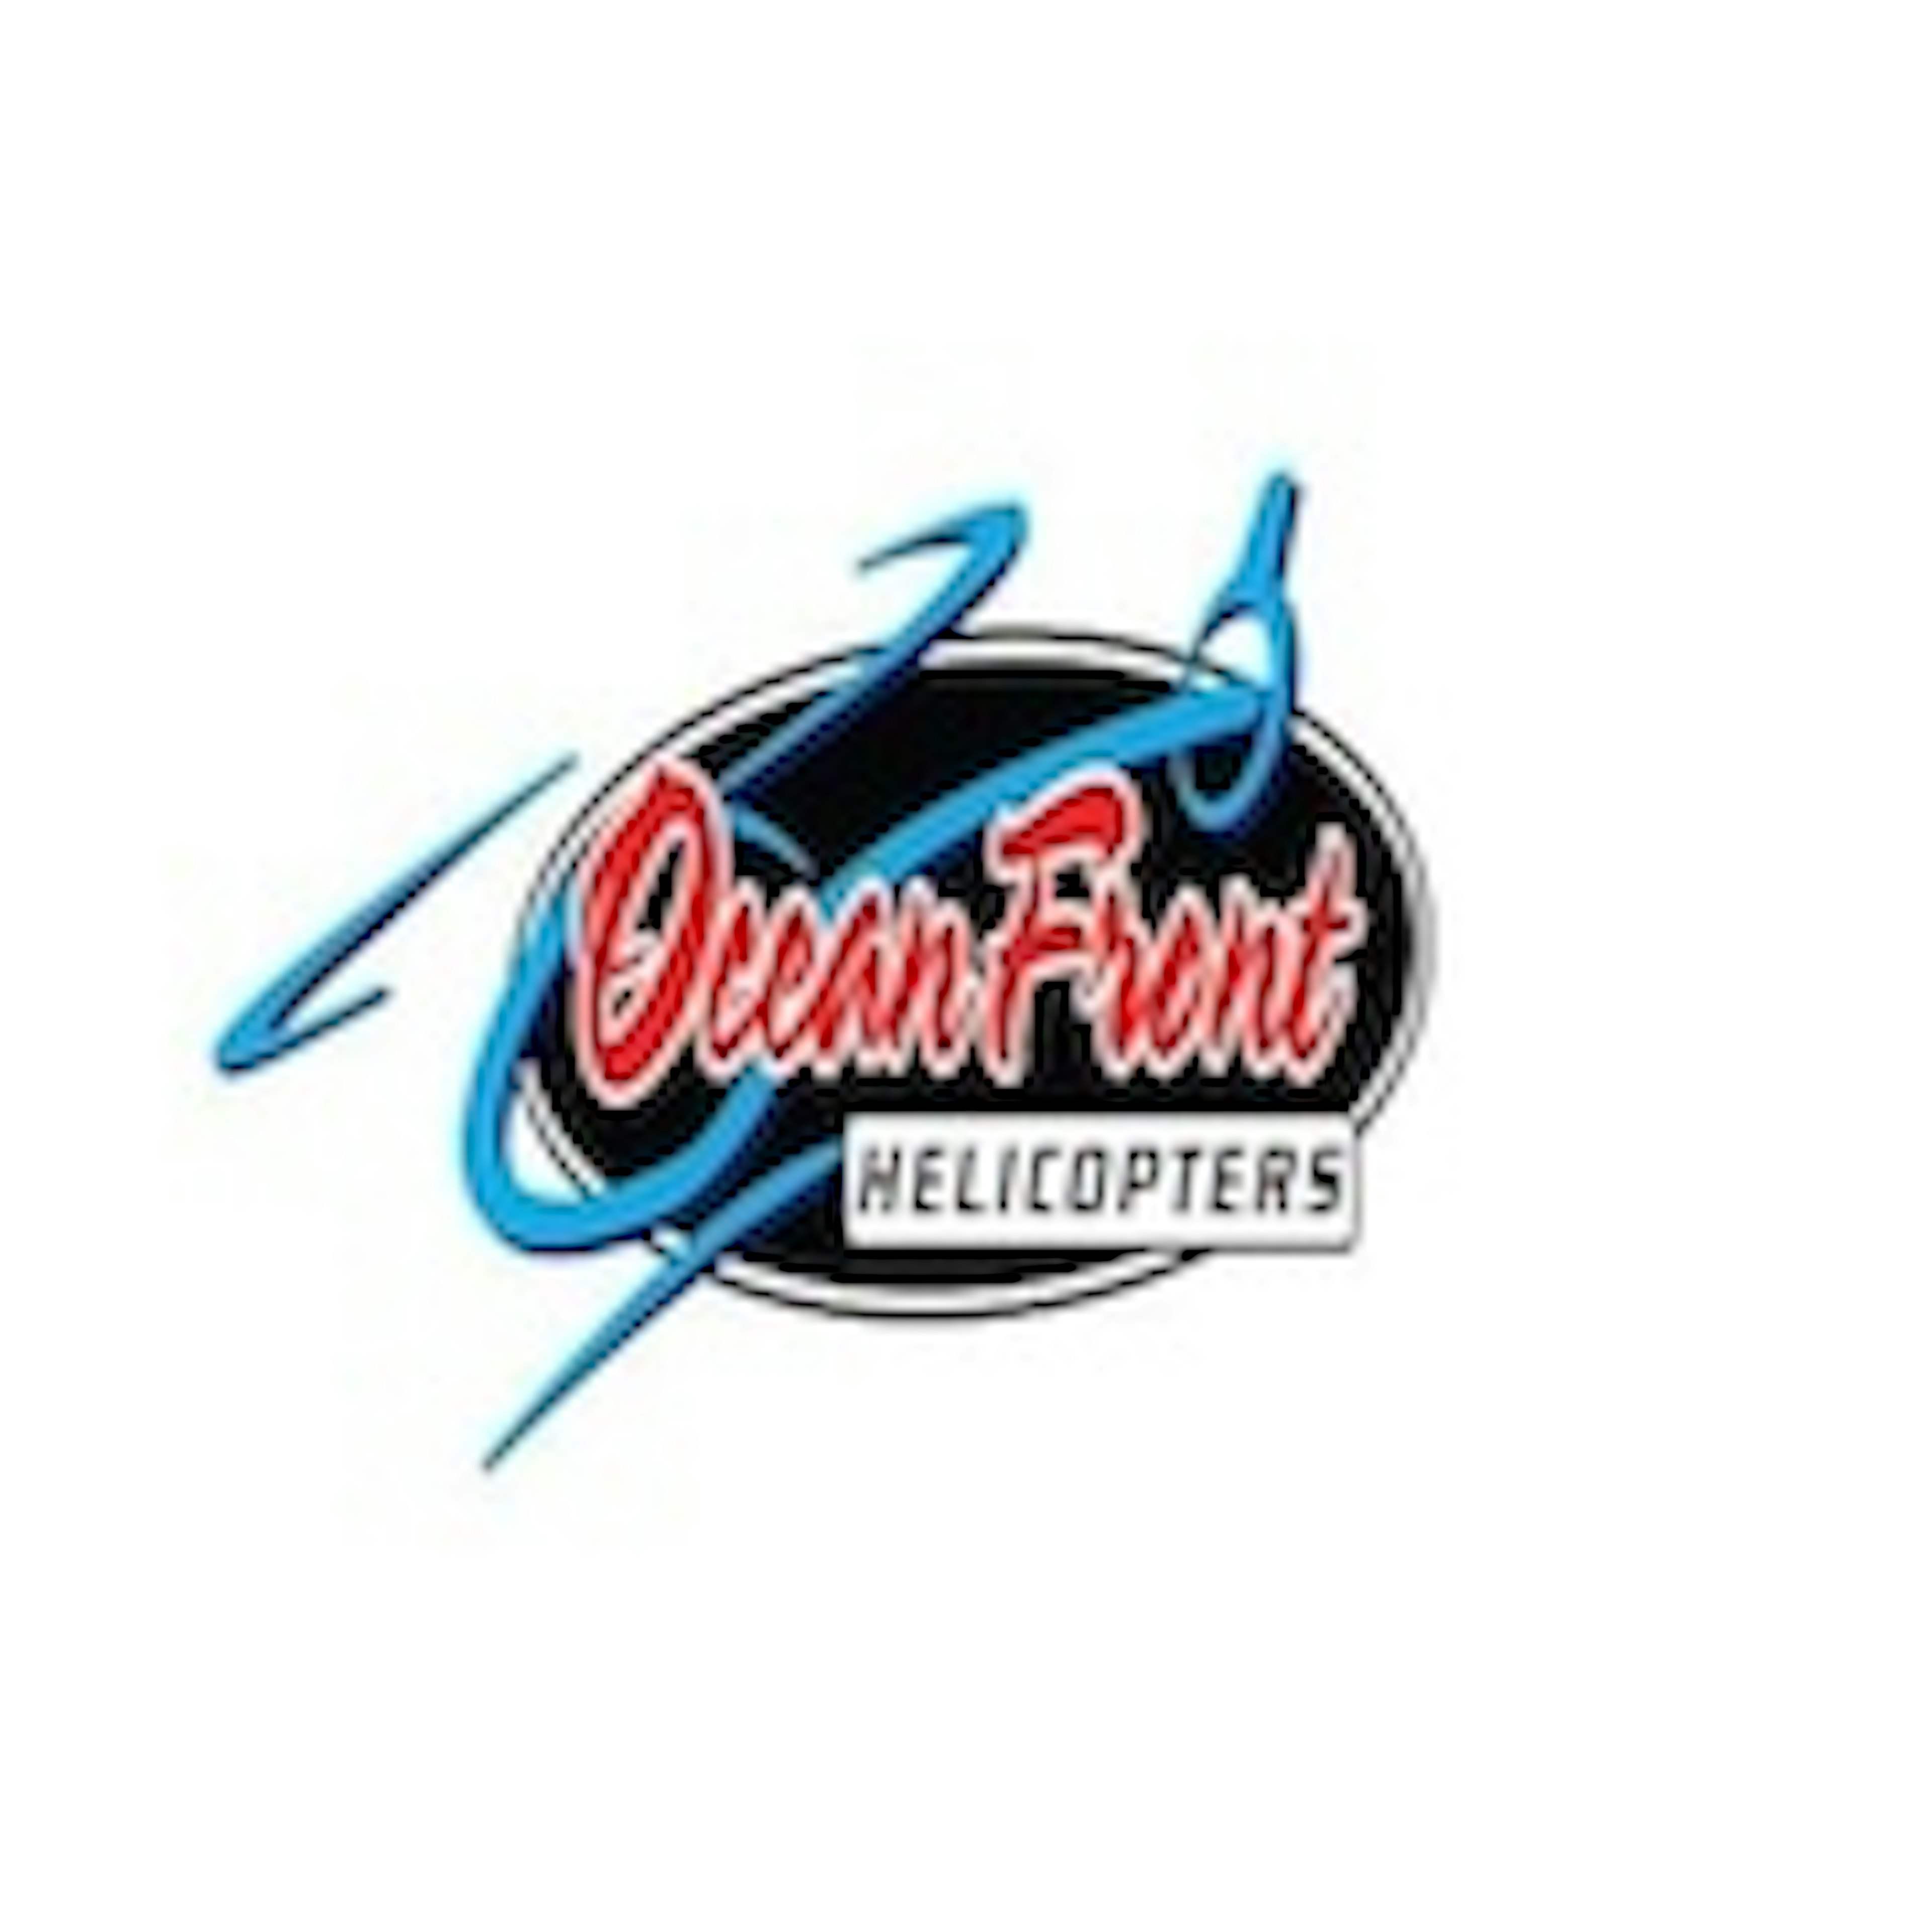 Ocean Front Helicopters